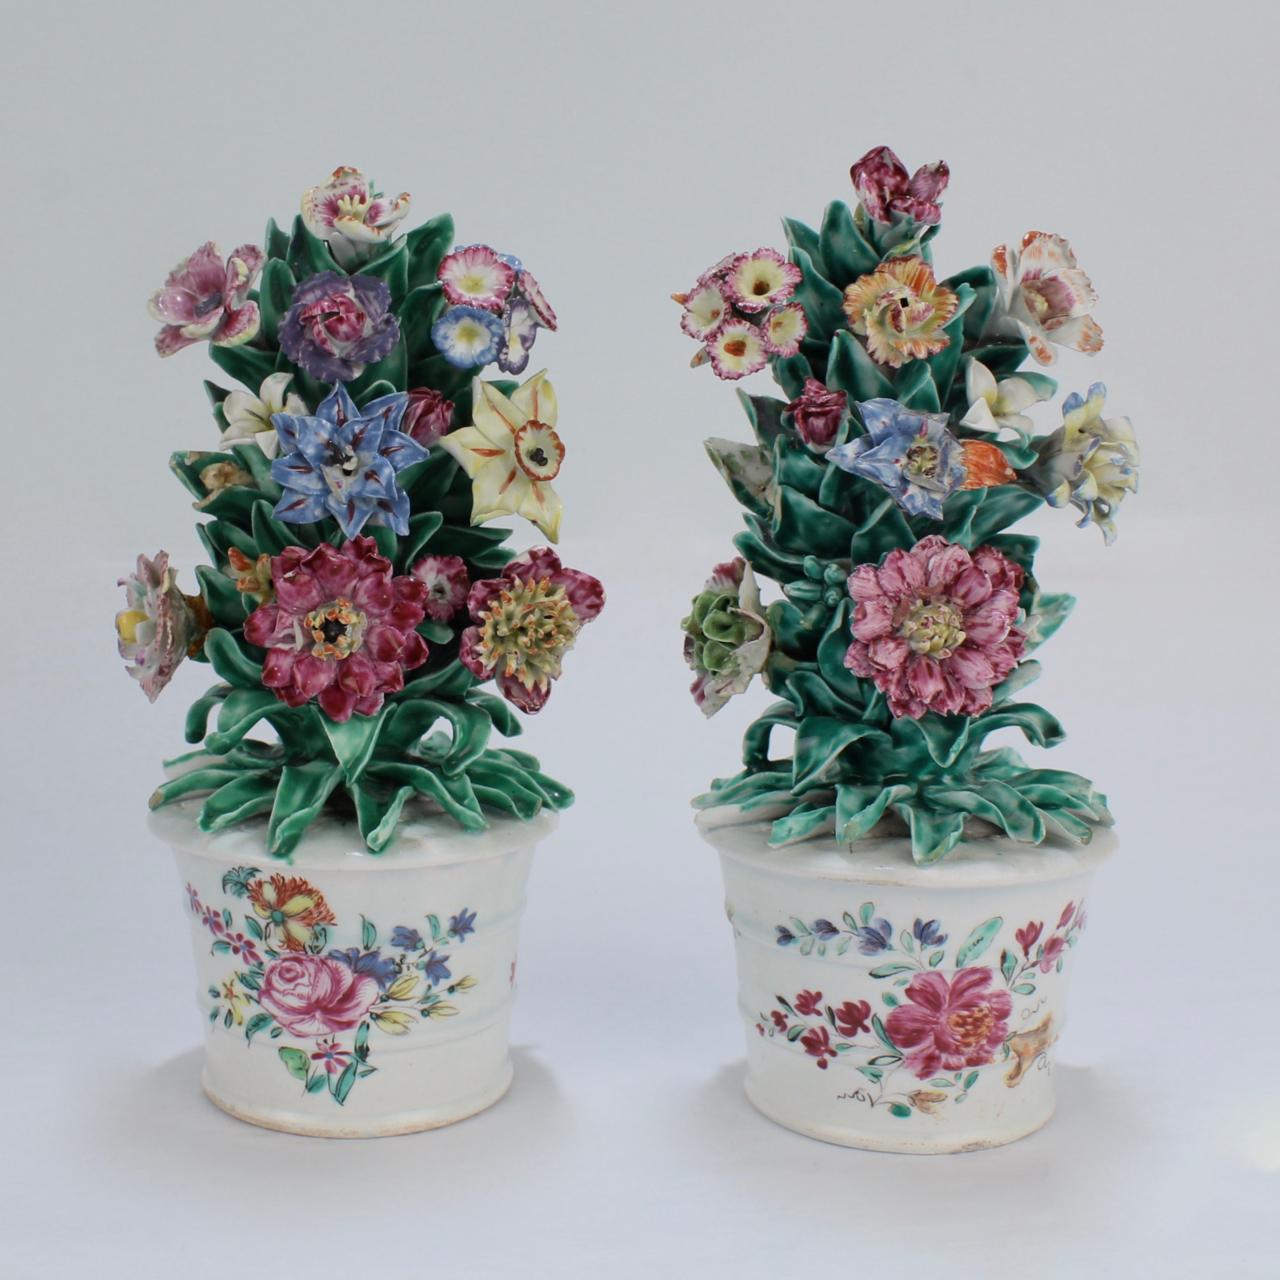 A very rare pair of antique English soft paste porcelain cachepots with flower encrusted bouquets with very good form and color.

Each modeled as miniature flower pot filled with bocage style porcelain floral arrangement decorated in polychrome